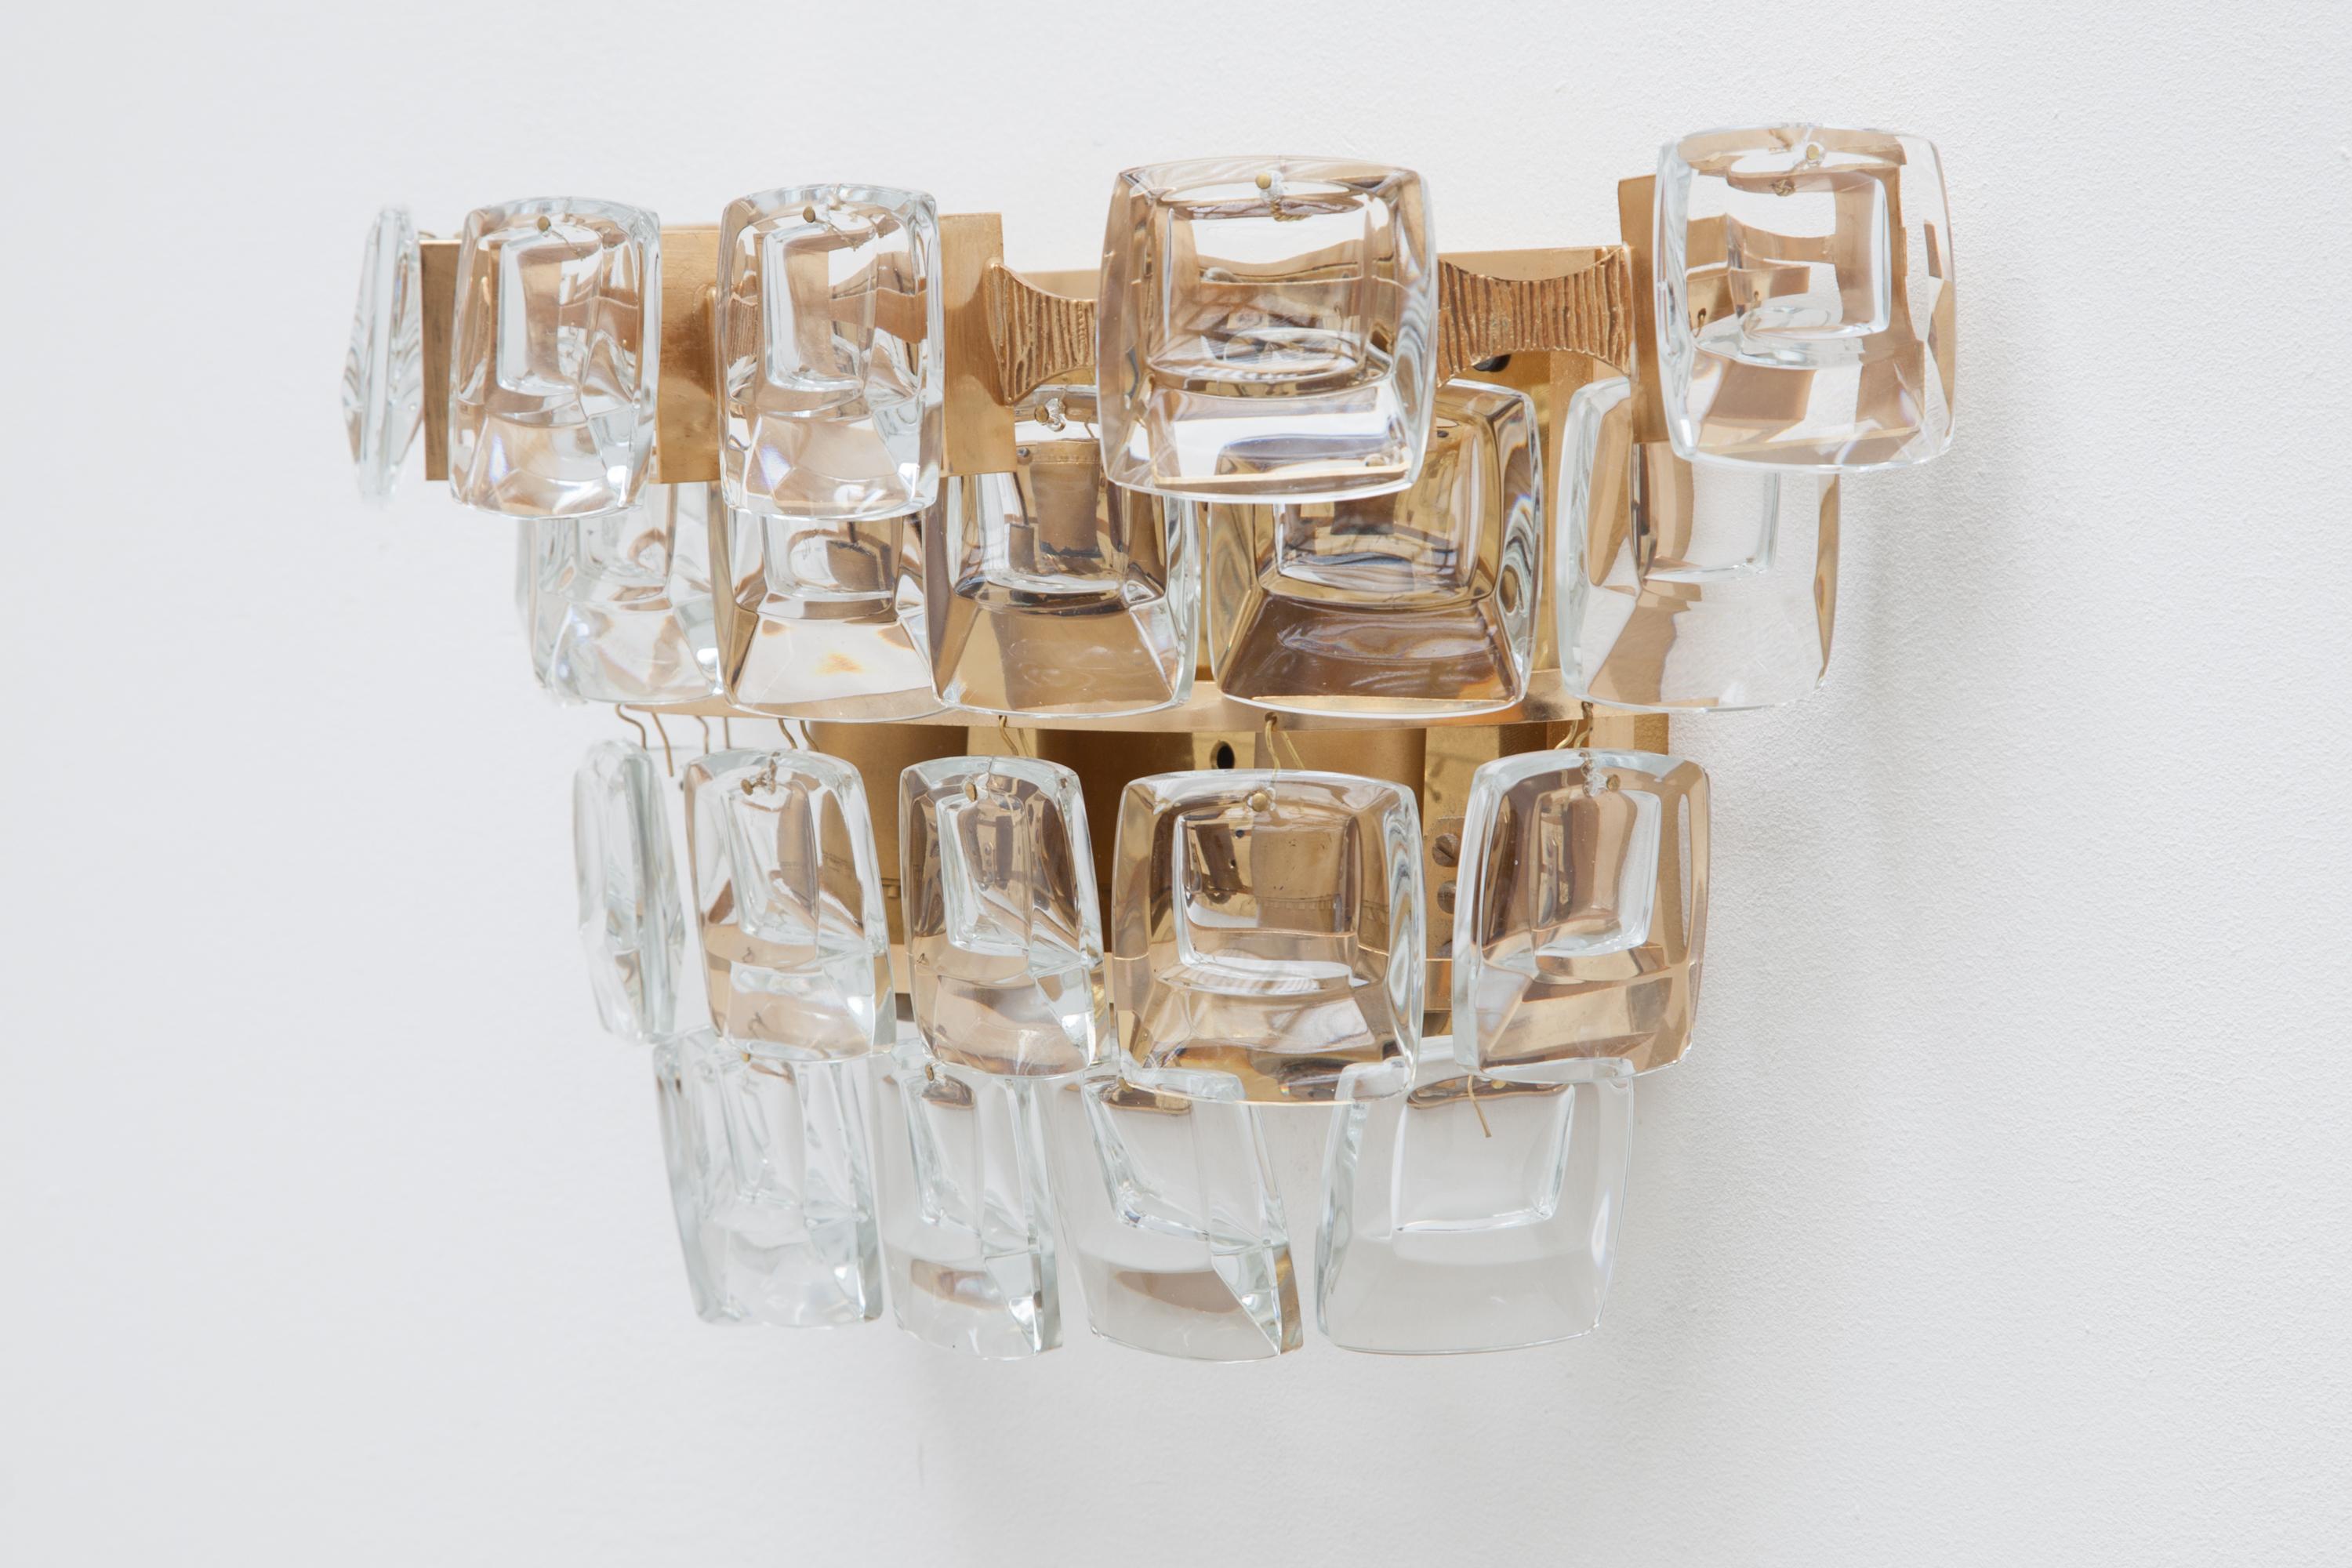 A set of 1950s wall lights, sconces by Palme and Walter, Germany, labeled. Features four tiers of square glass crystals on a textured Brutalist brass frame.Lit by three bulbs. Four sets available.